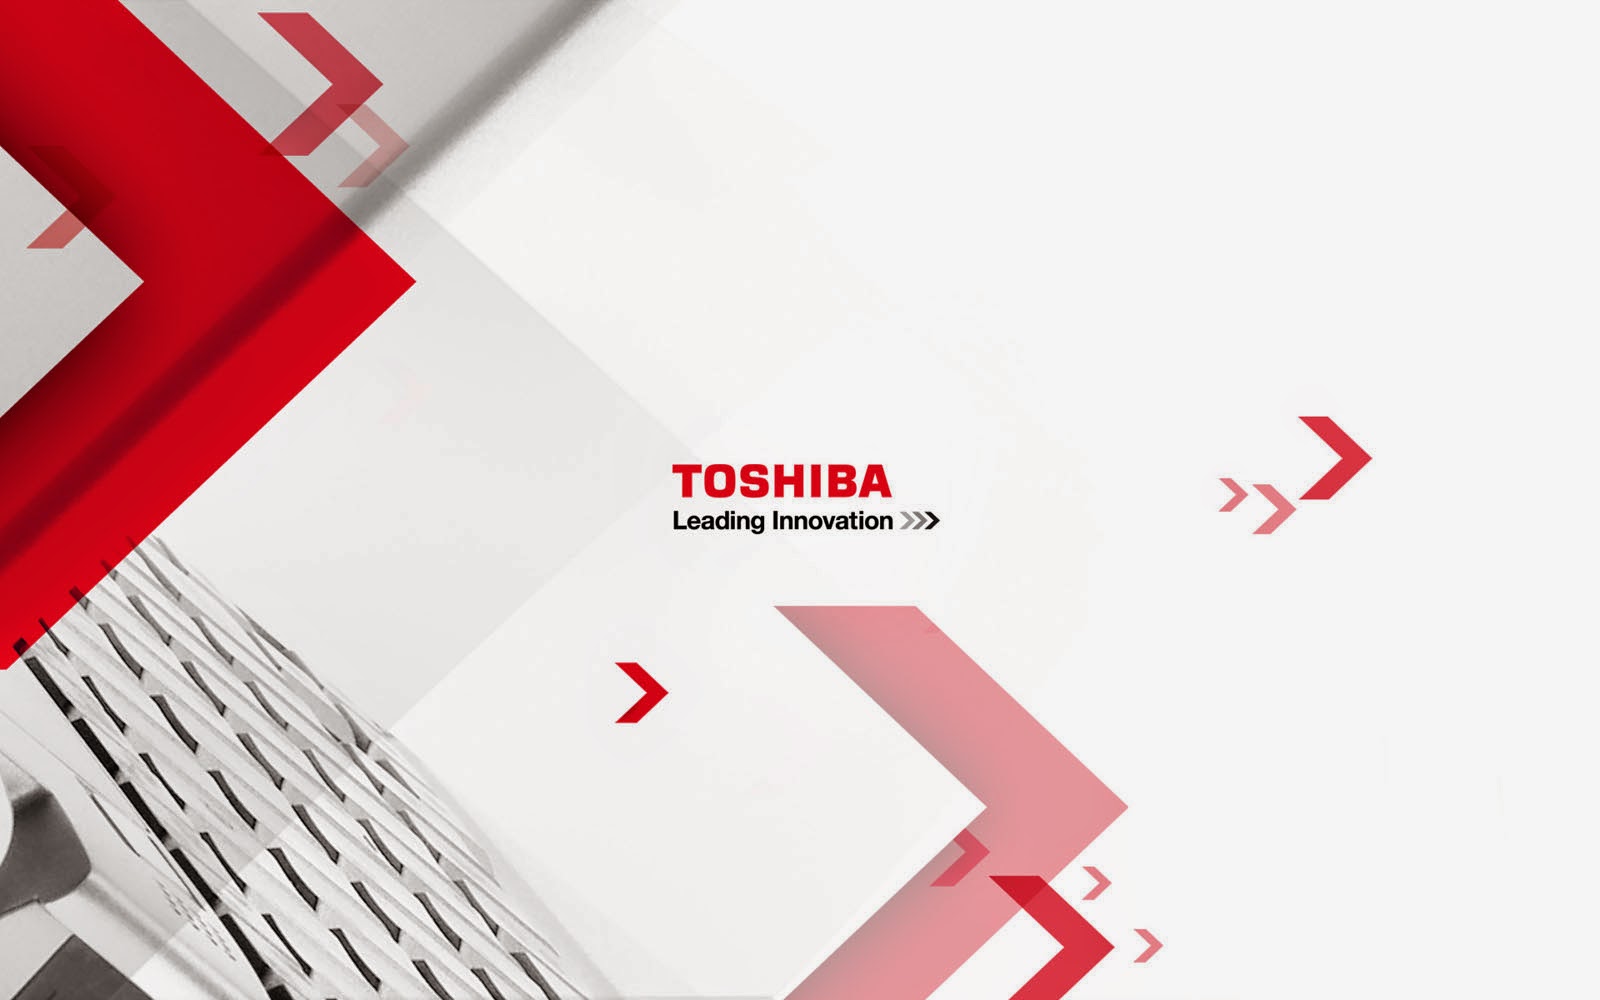 Tag Toshiba Wallpaper Background Photos Image Andpictures For